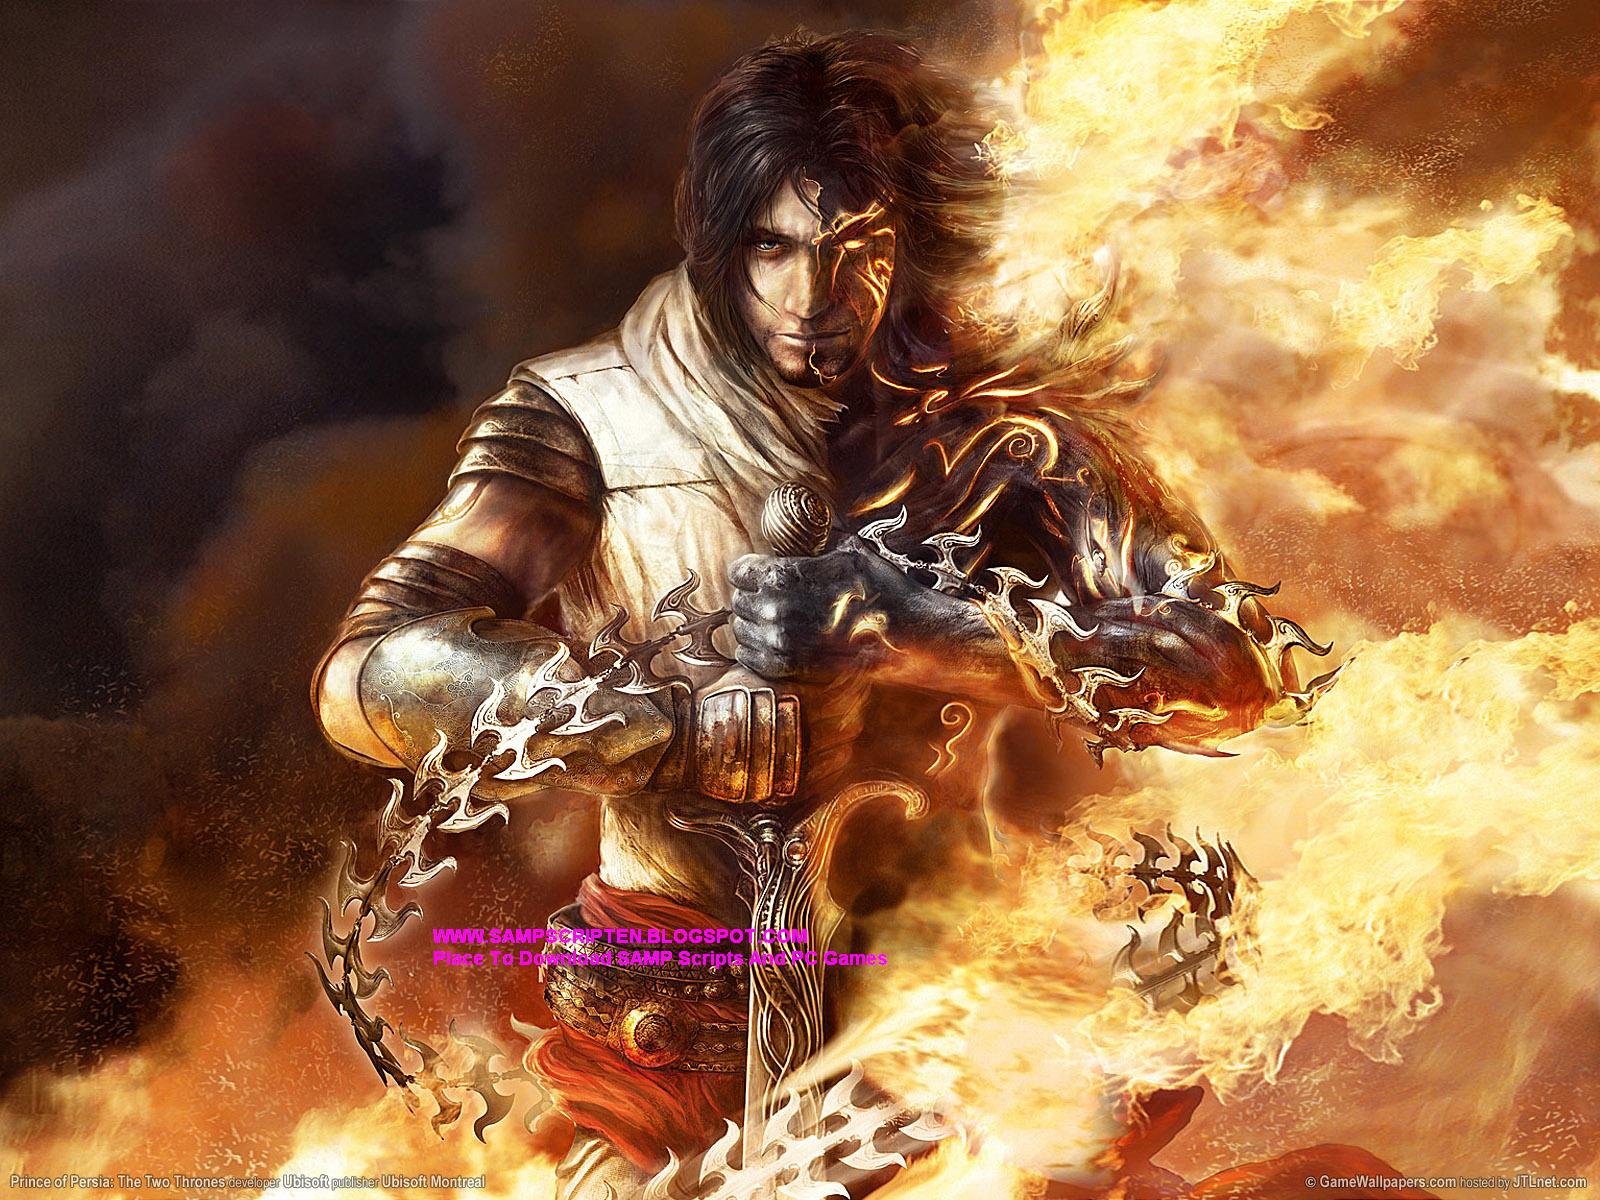 Sa Mp Pc Games Prince Of Persia The Two Thrones